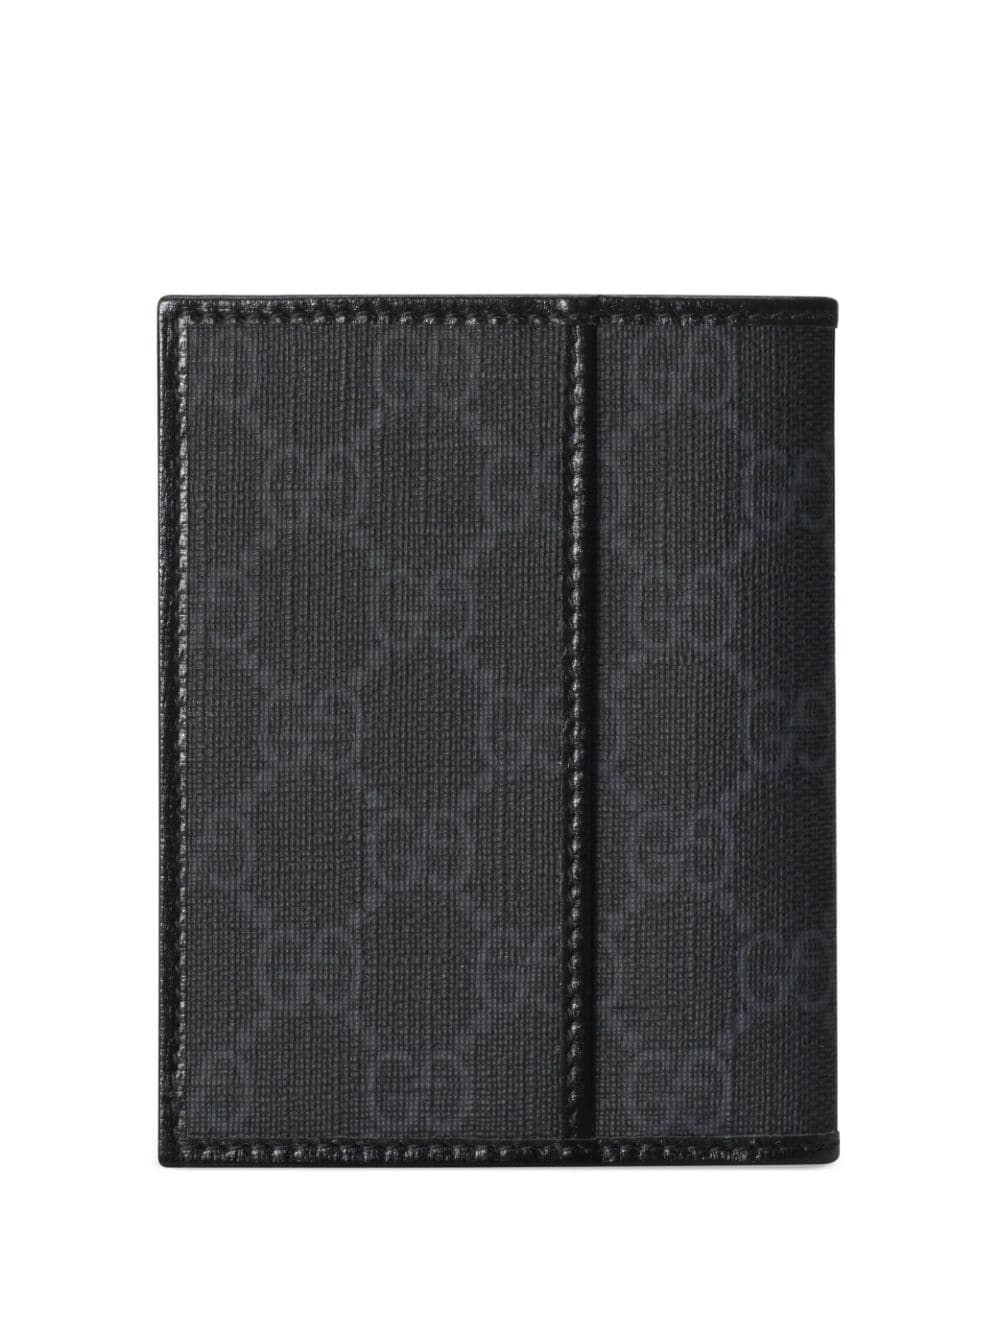 Card holder with gg logo - 5